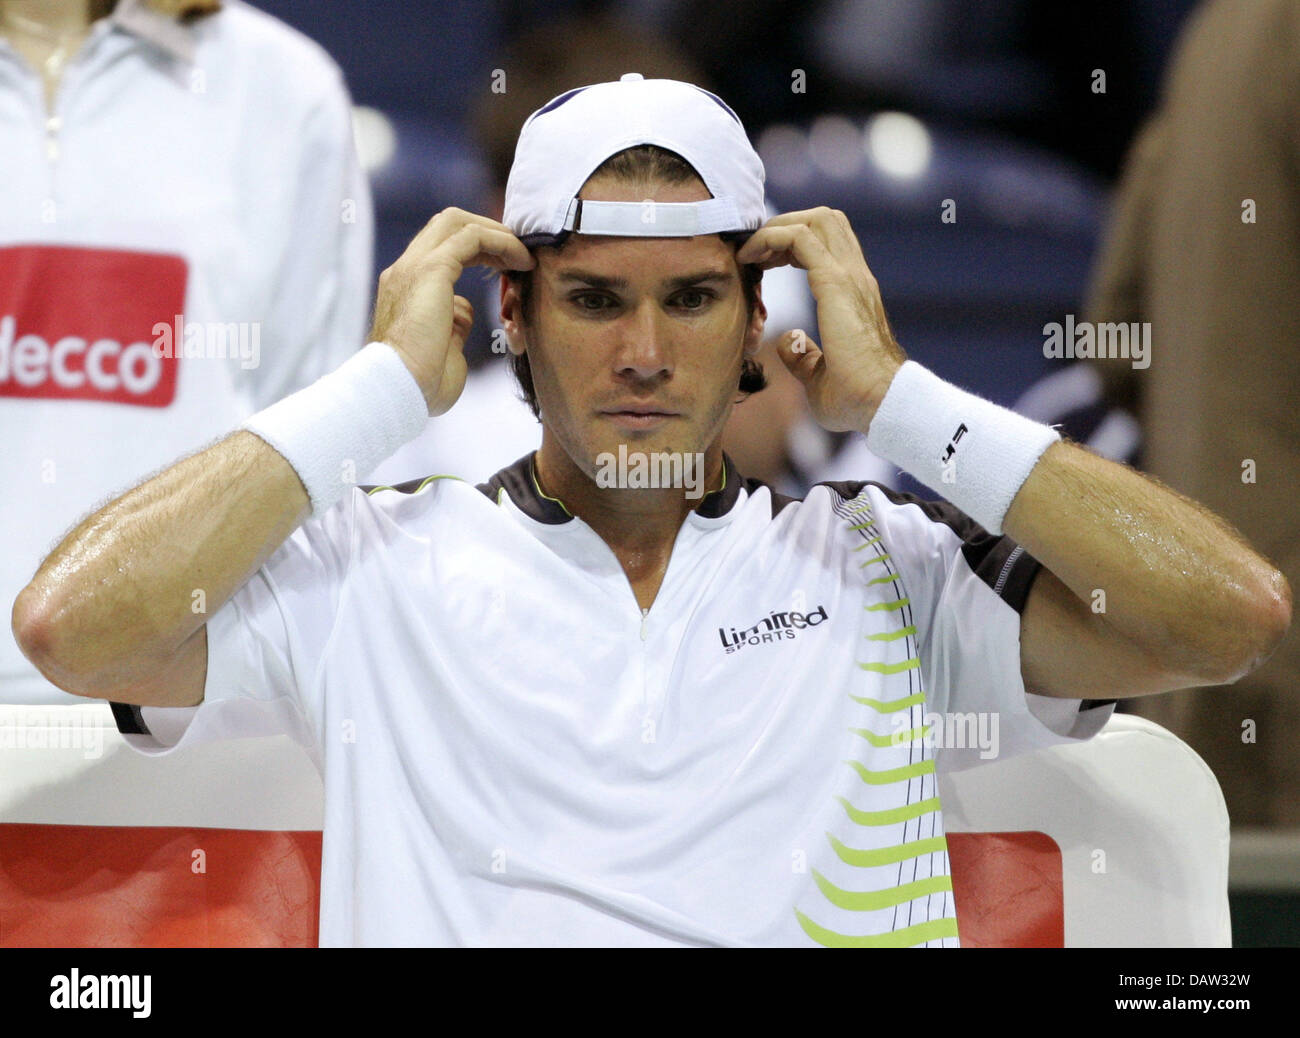 German tennis pro Tommy Haas takes a break during the Davis Cup match vs Croatian Mario Ancic in Krefeld, Germany, Friday, 09 February 2007. Photo: Roland Weihrauch Stock Photo